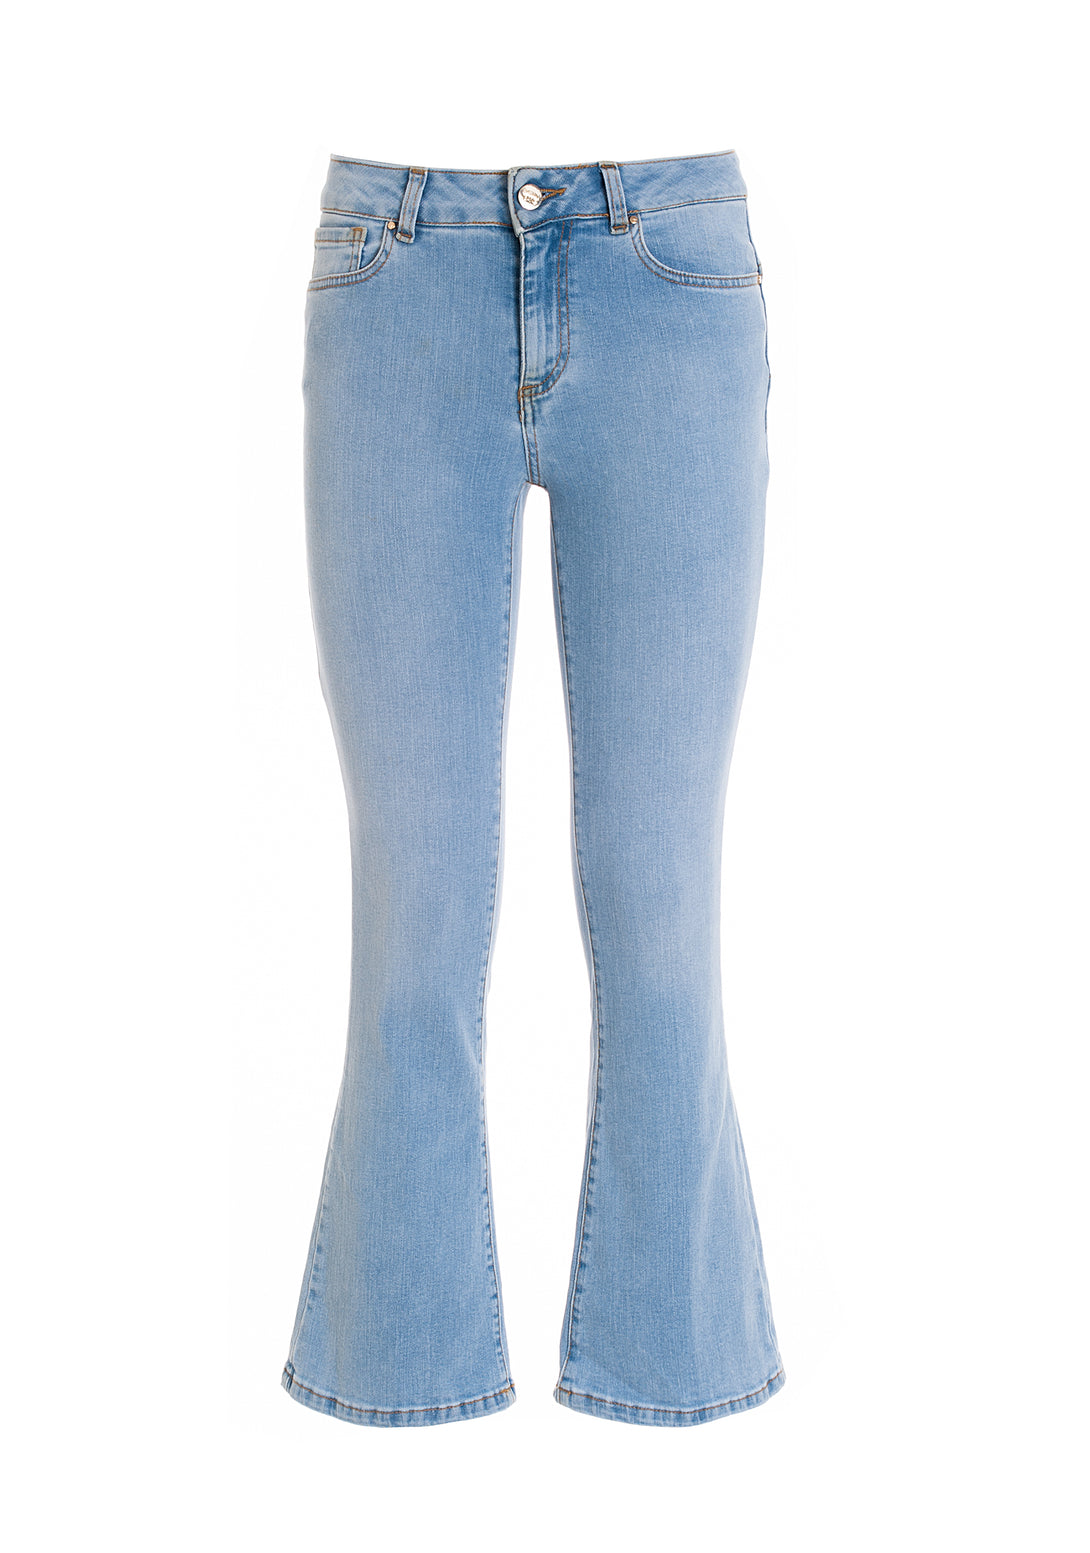 Jeans Bella flare cropped made with a sophisticated stretch denim with a light wash